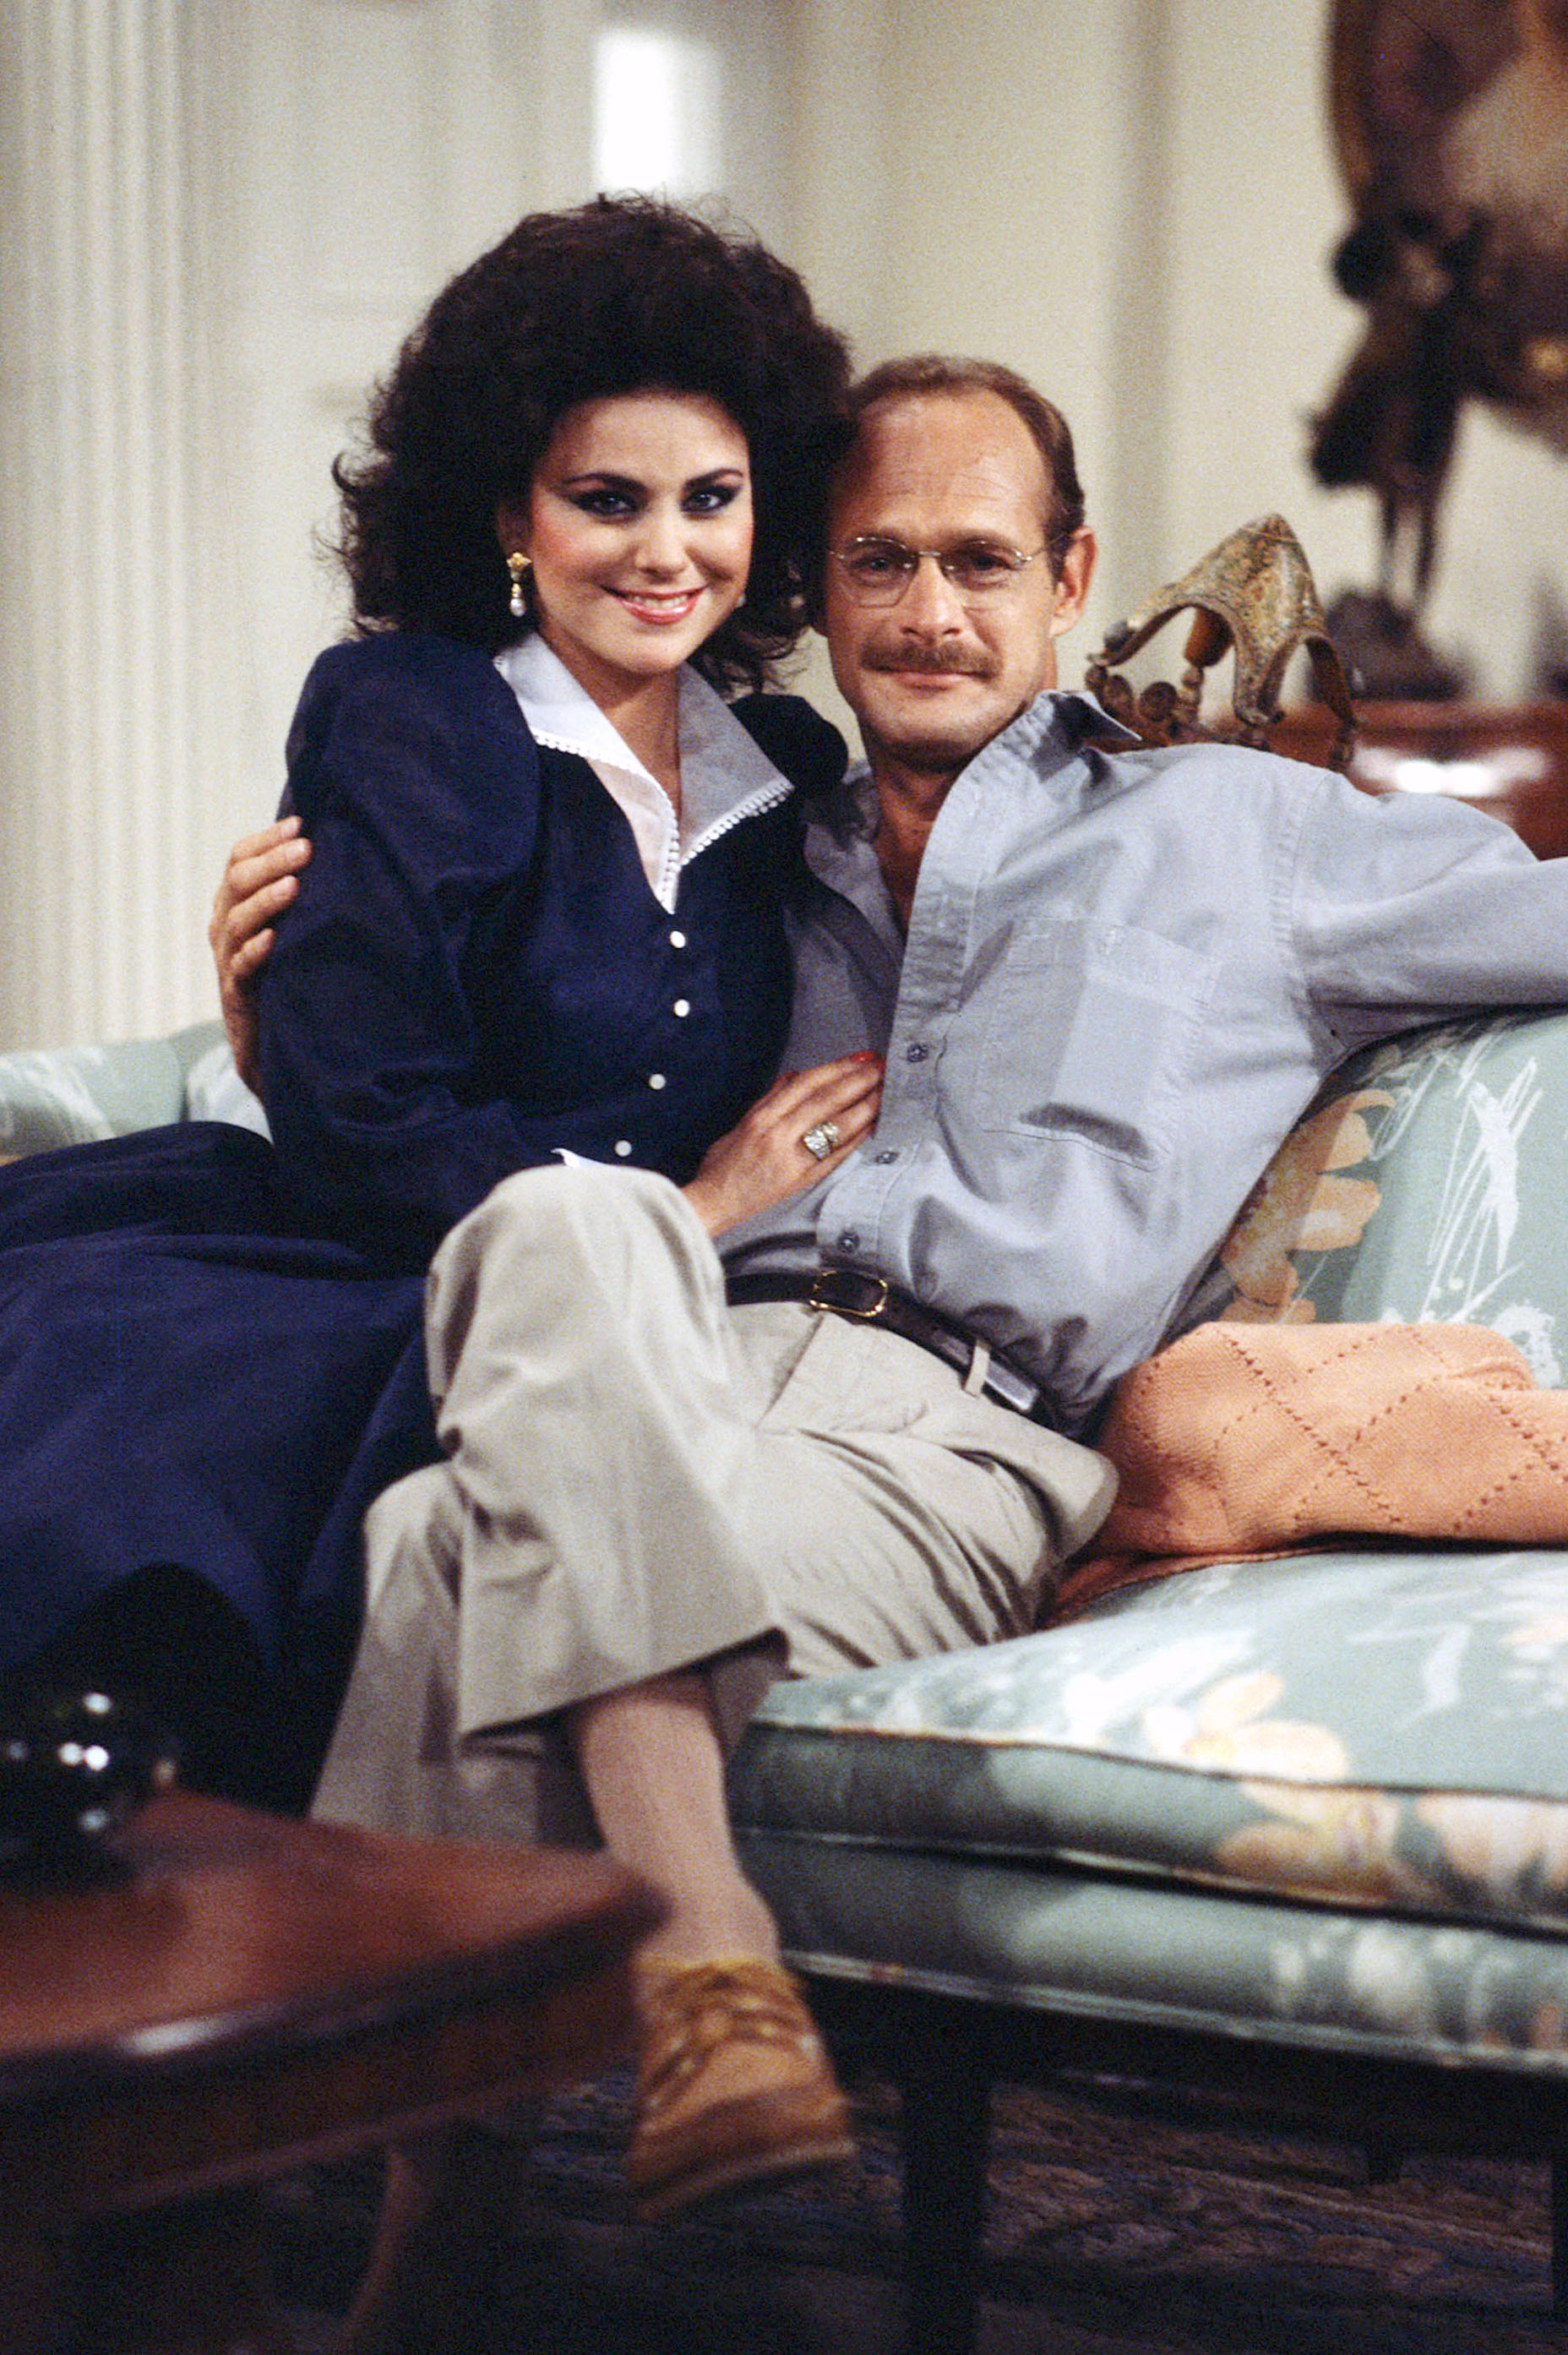 Delta Burke stars as Suzanne Sugarbaker and Gerald McRaney as Dash Goff, in the CBS television series "Designing Women" circa January 1, 1989 | Source: Getty Images